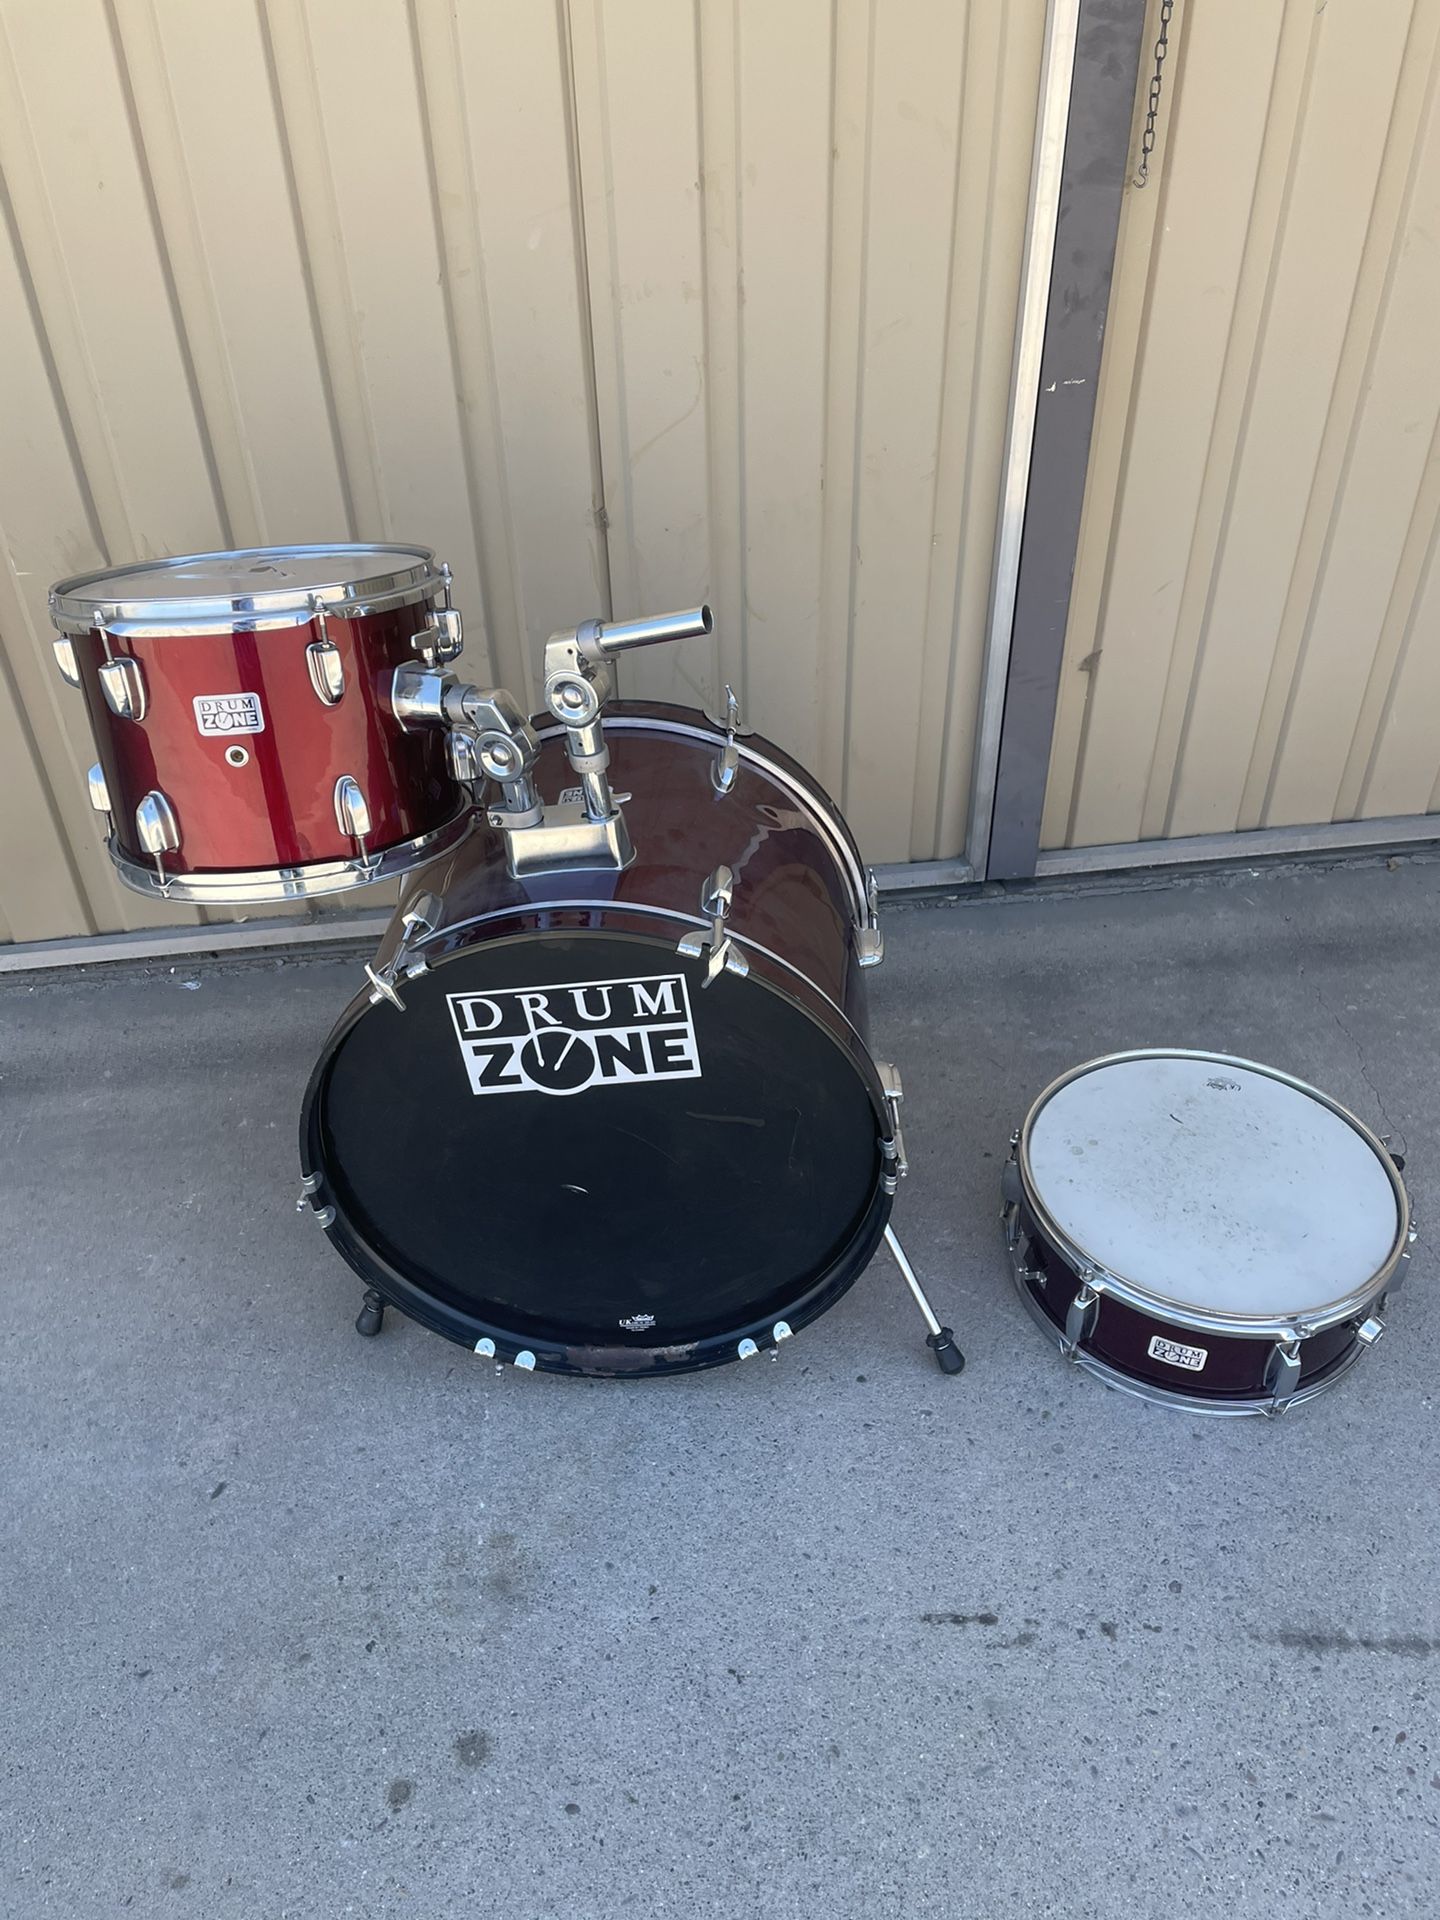 Three Piece Drum set DrumZone  This set is not complete and needs to be repaired